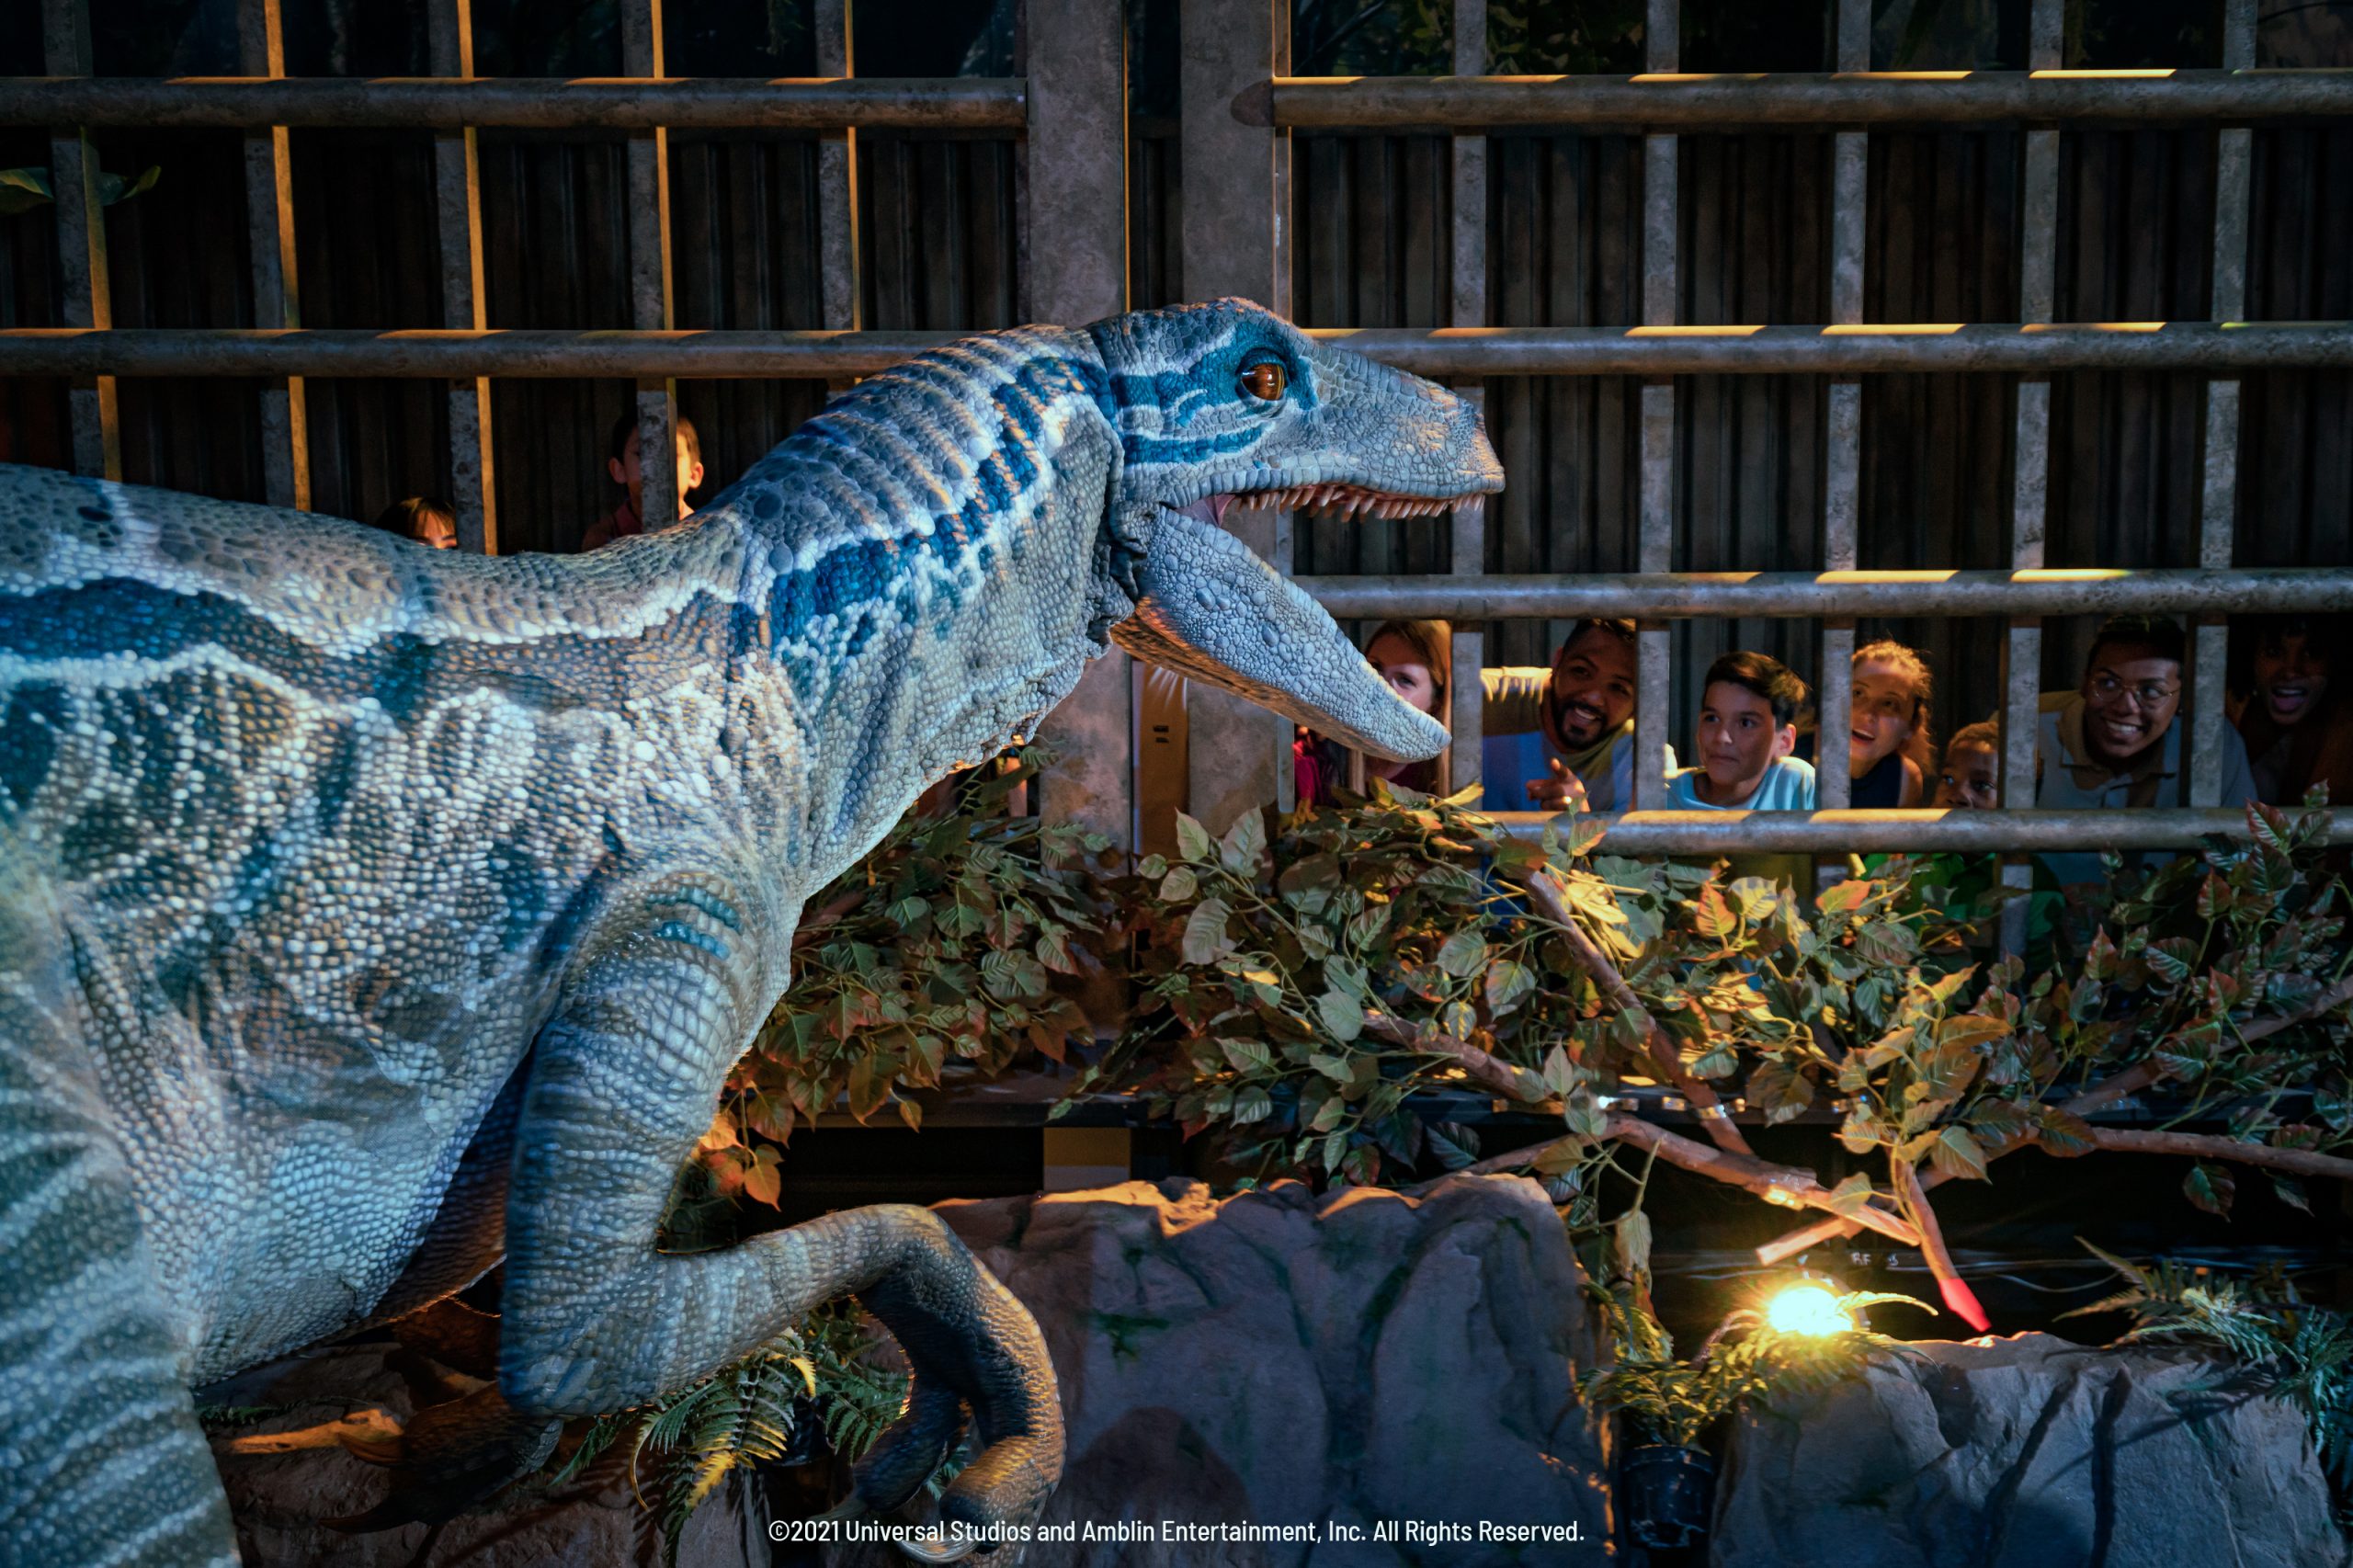 Jurassic World: The Exhibition Roars into Denver March 2022 for Western United States Premiere!